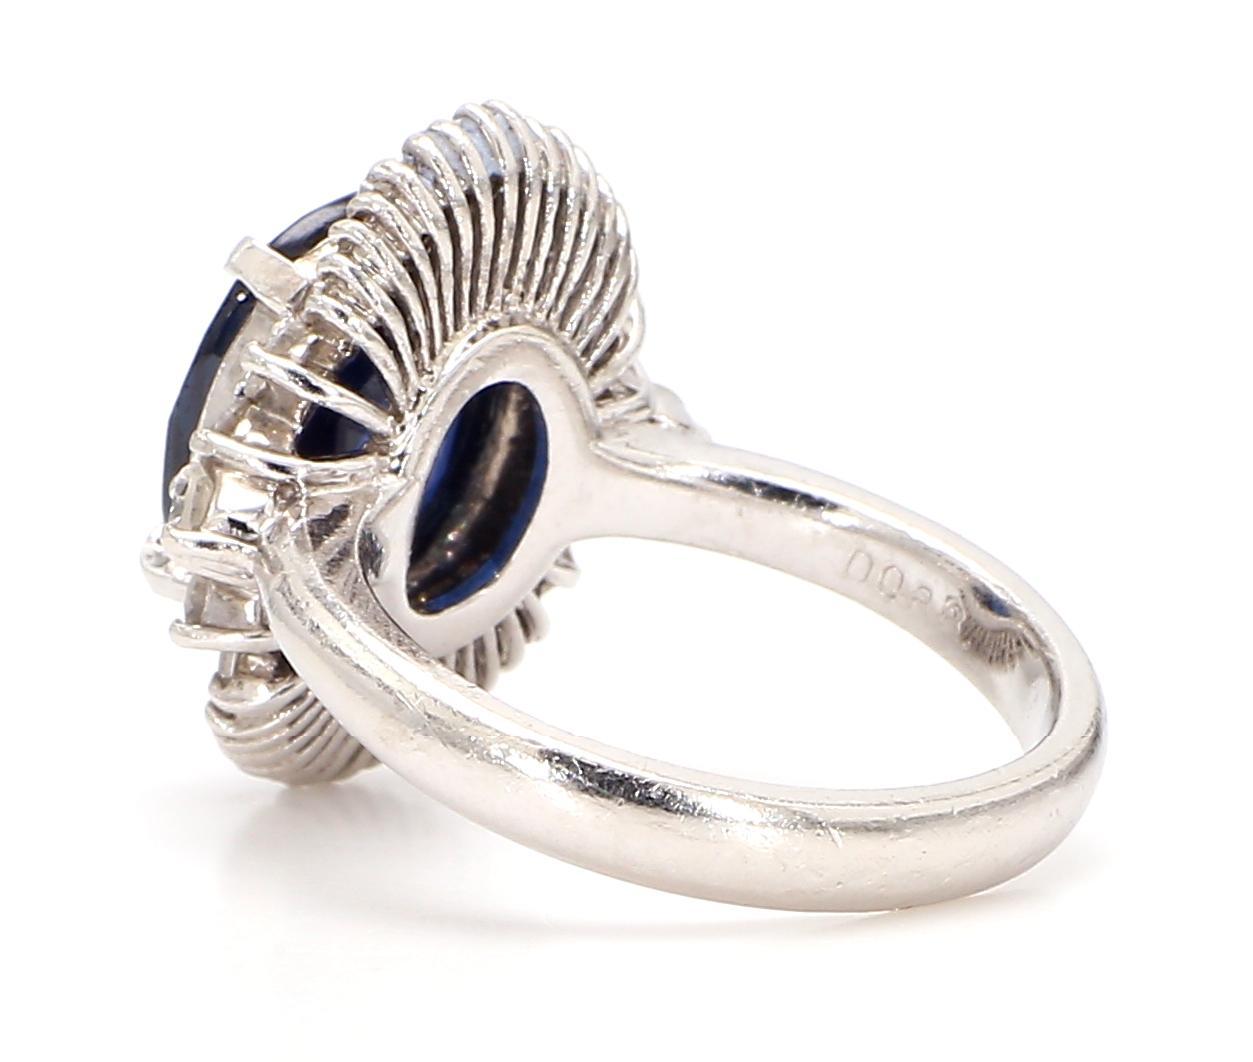 Baguette Cut GIA Certified 4.2 Carat Blue Sapphire and 1.5 Carat Diamond Cocktail Ring For Sale